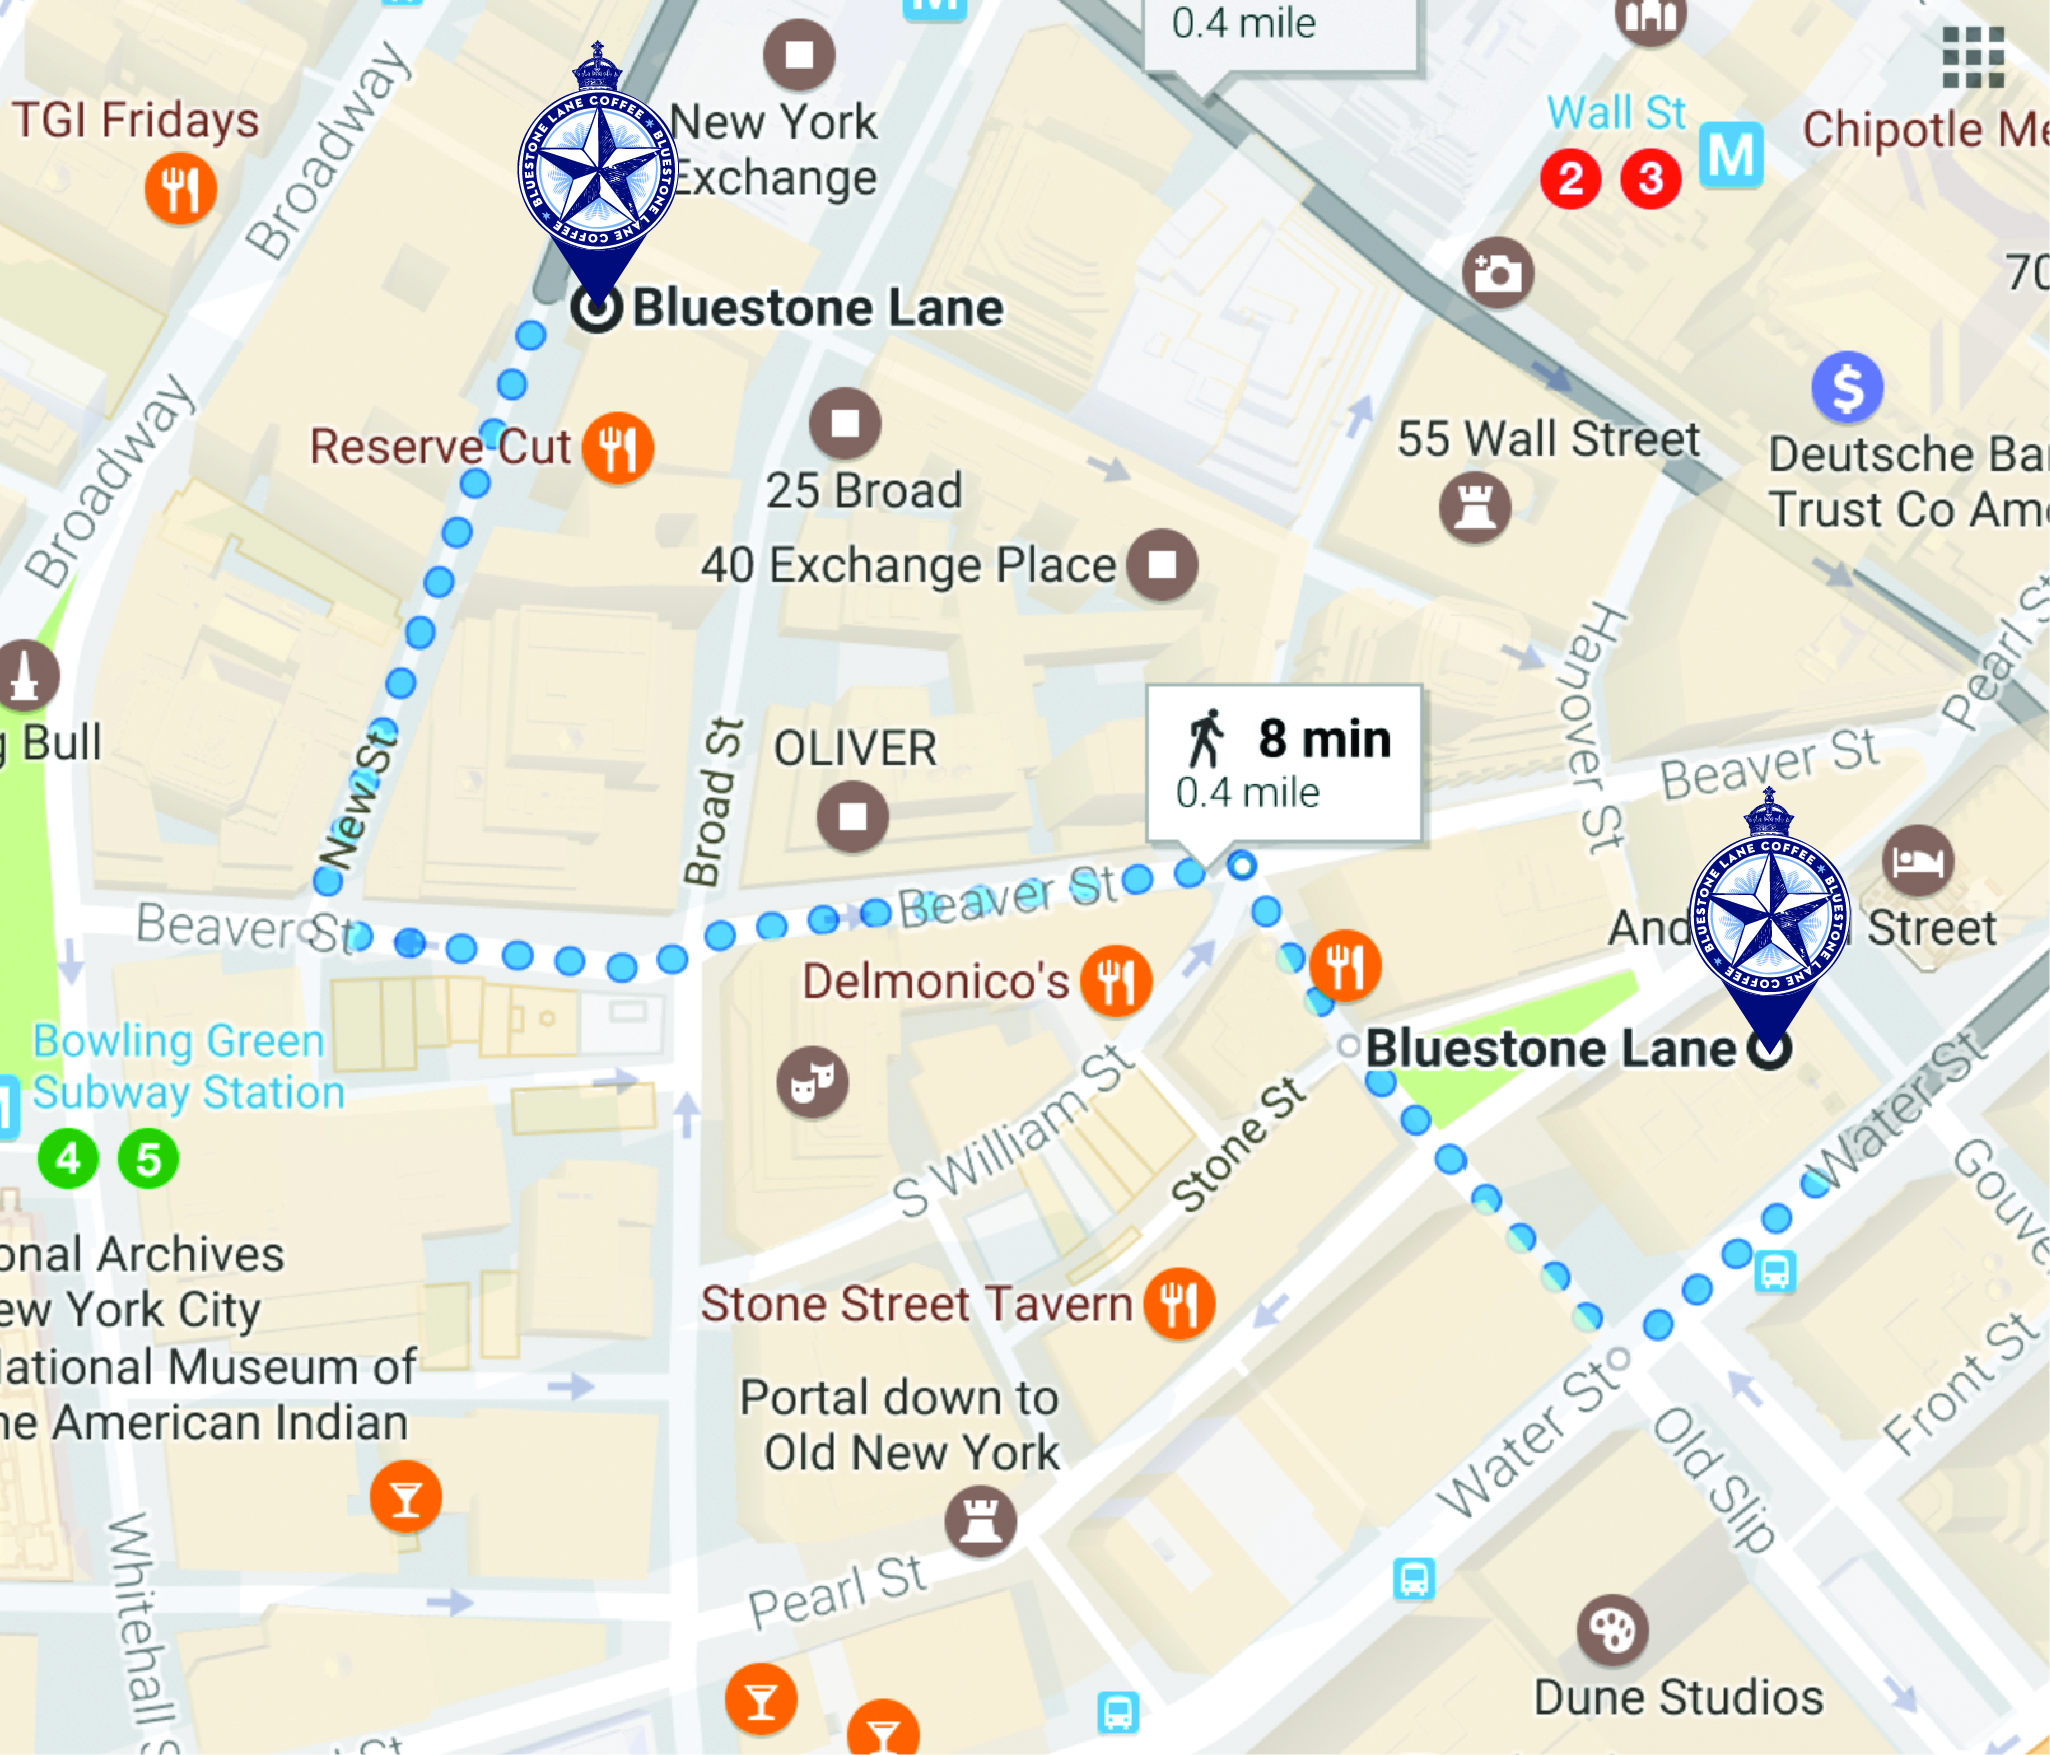 Google map image of walking from 30 Broad Street to 90 Water Street. 